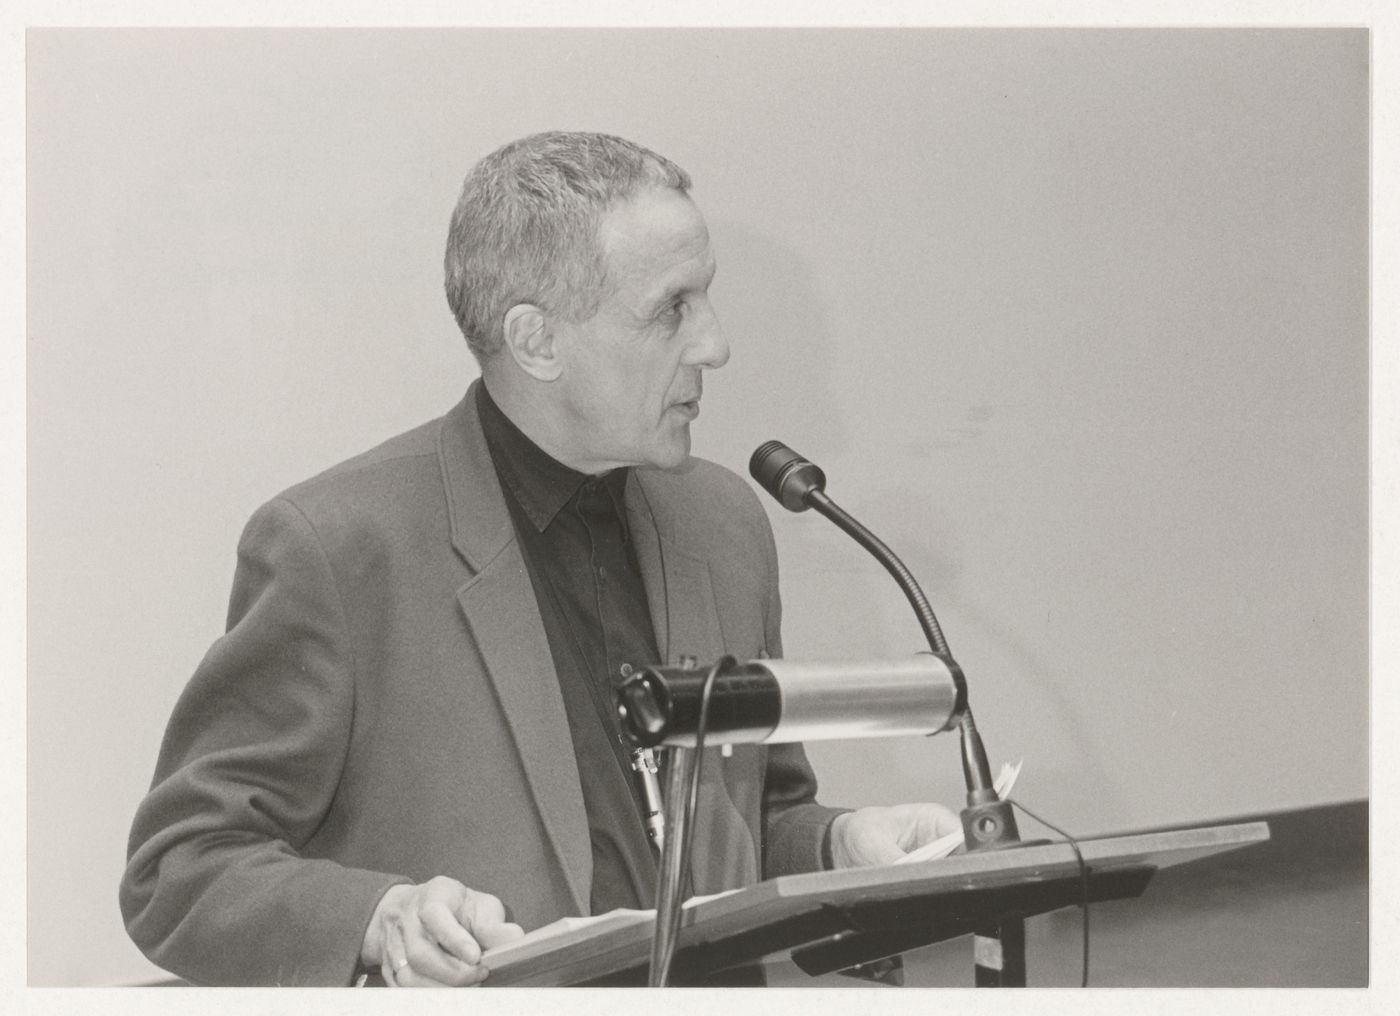 Kenneth Frampton speaking during the Invisible in Architecture conference, Delft